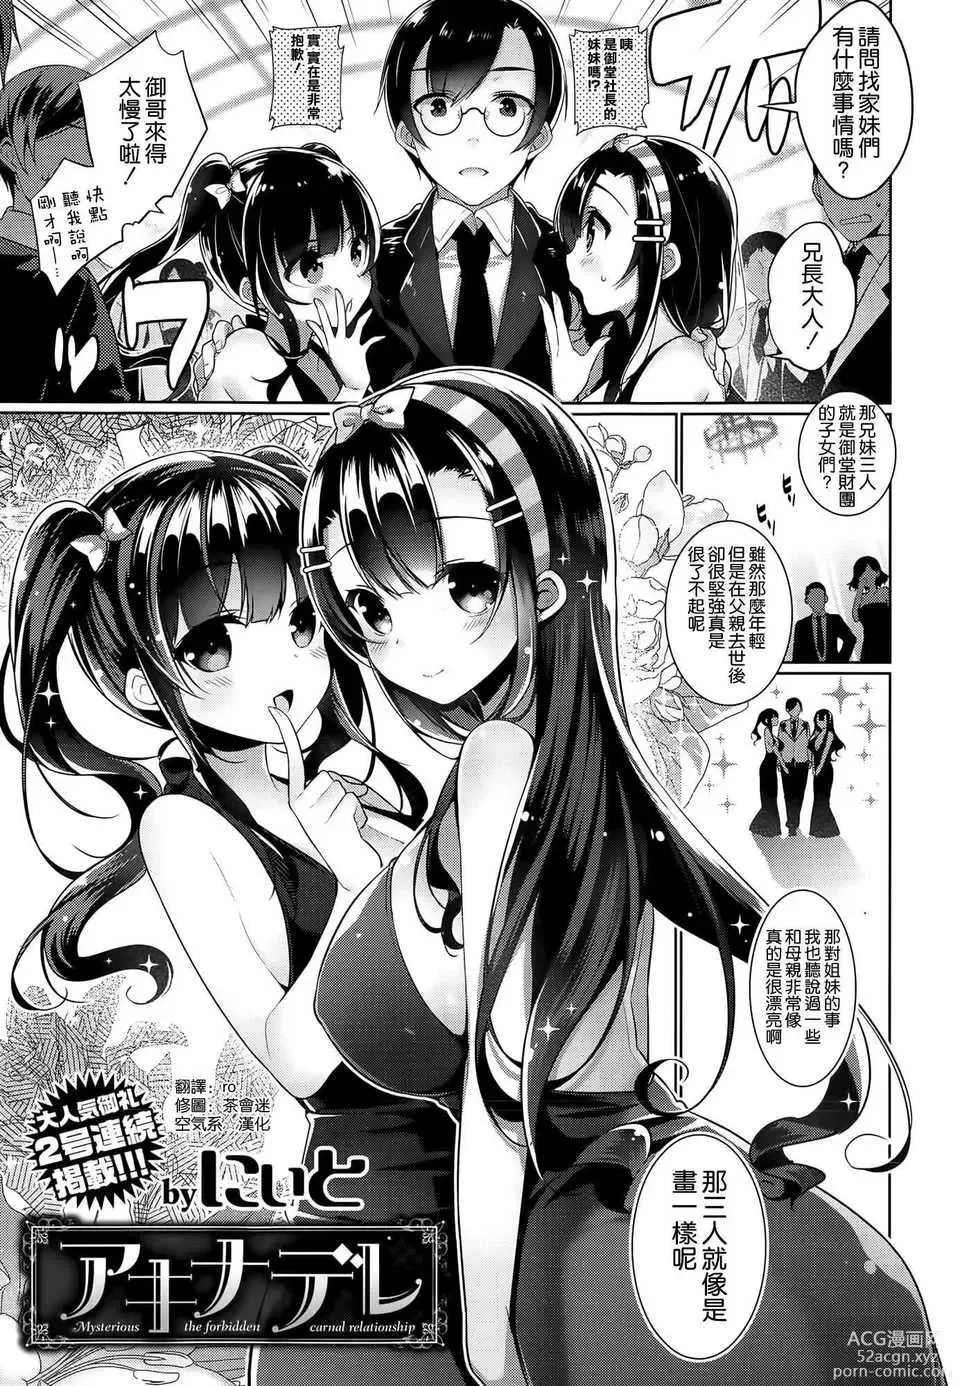 Page 3 of manga Aki na Dere - Mysterious the forbidden carnal relationship